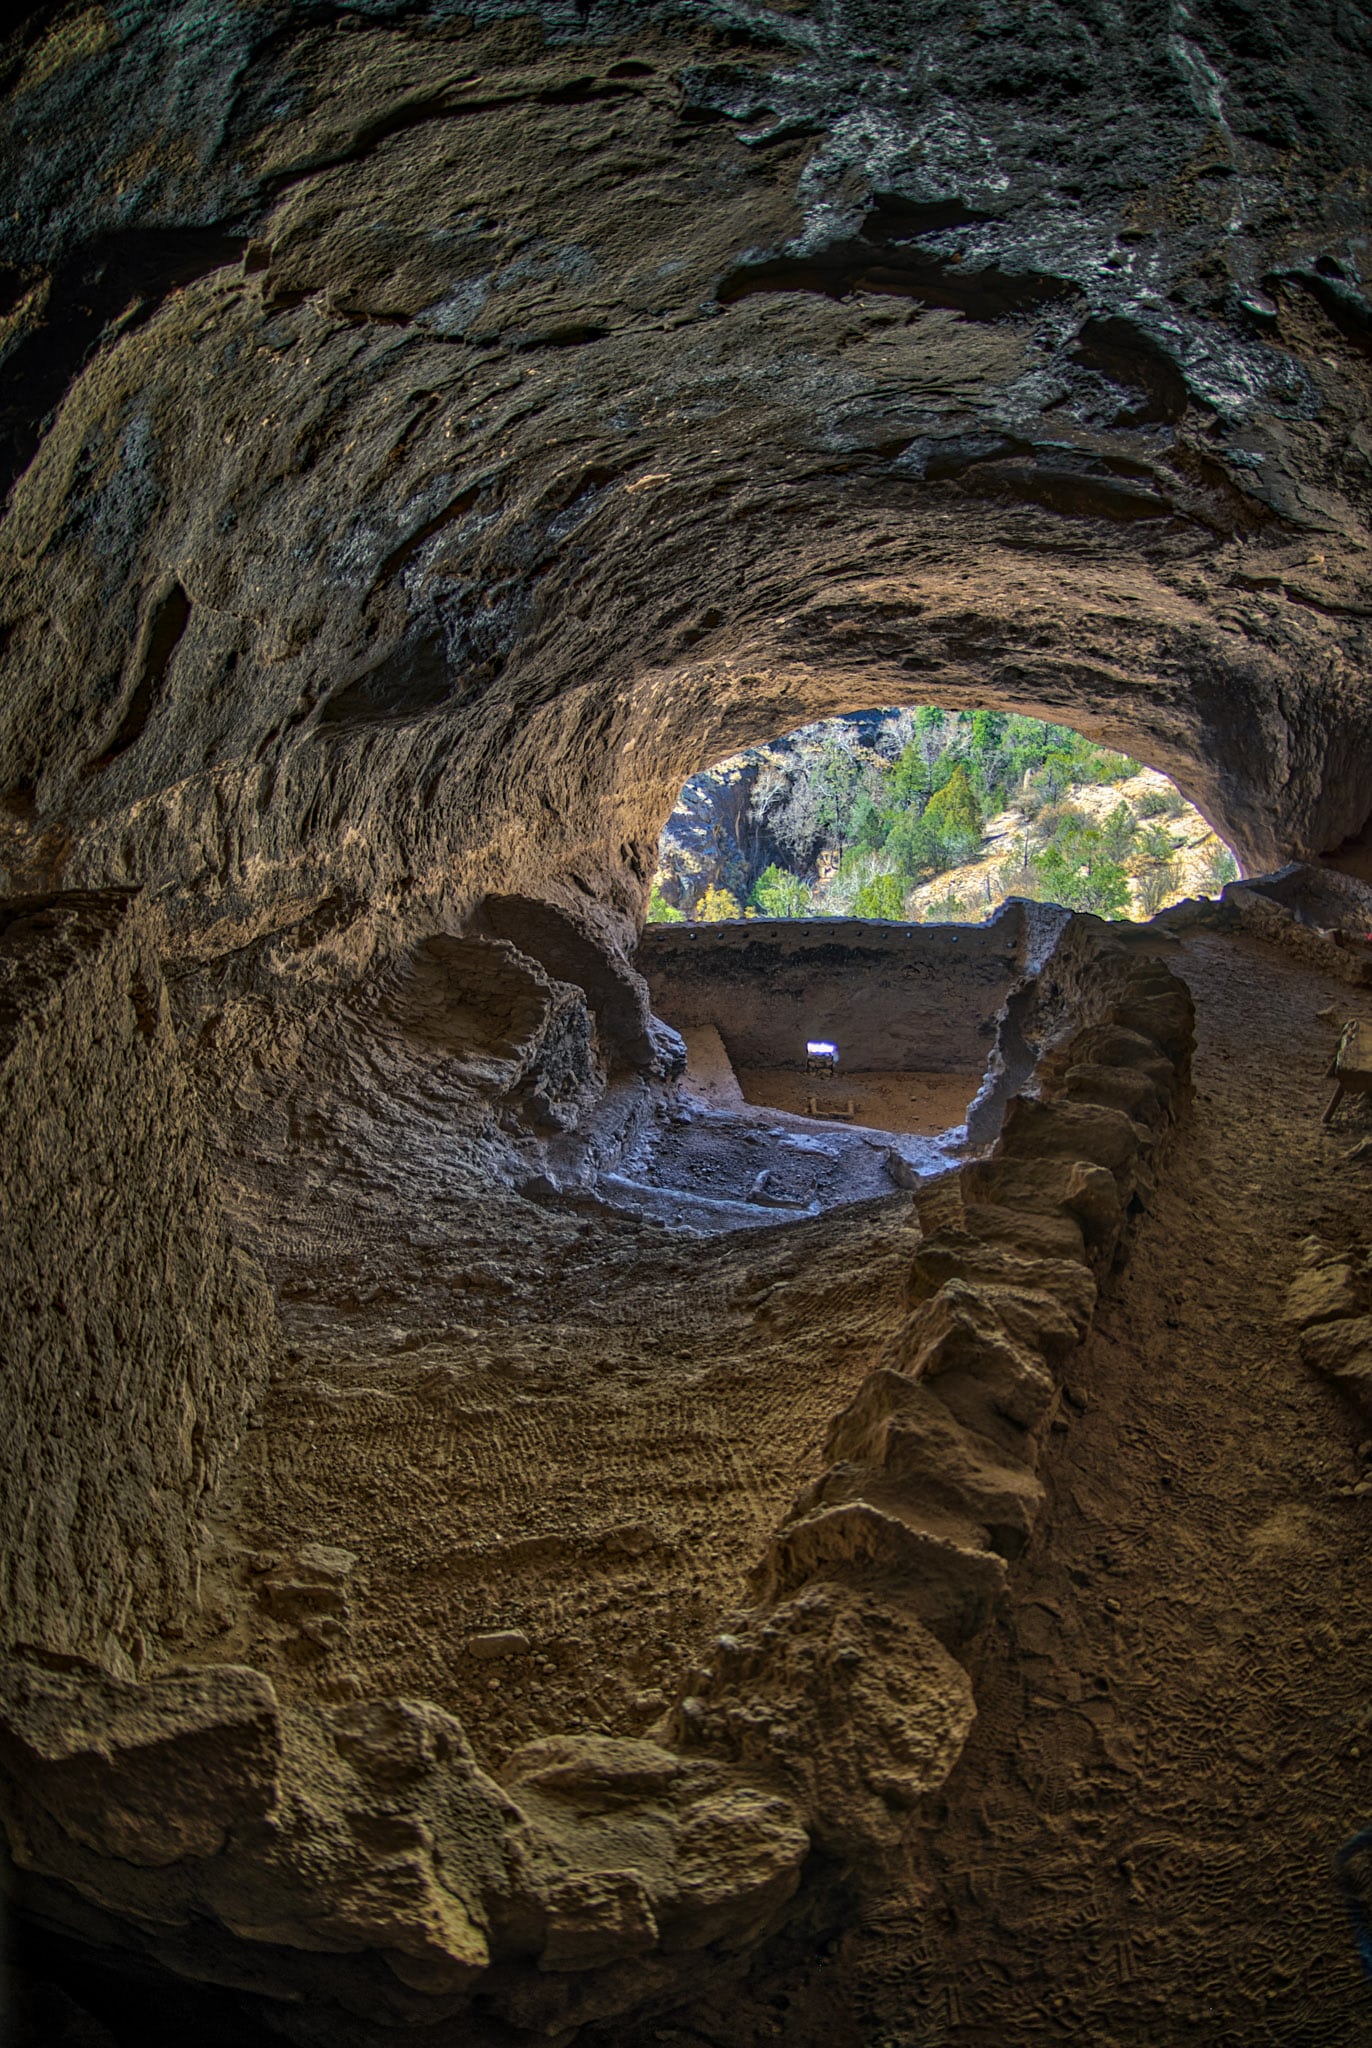 This view from the interior of one of the rooms in a cave at Gila Cliff Dwellings in New Mexico give the visitor the feel of what it must have been like when the Mogollon lived there.